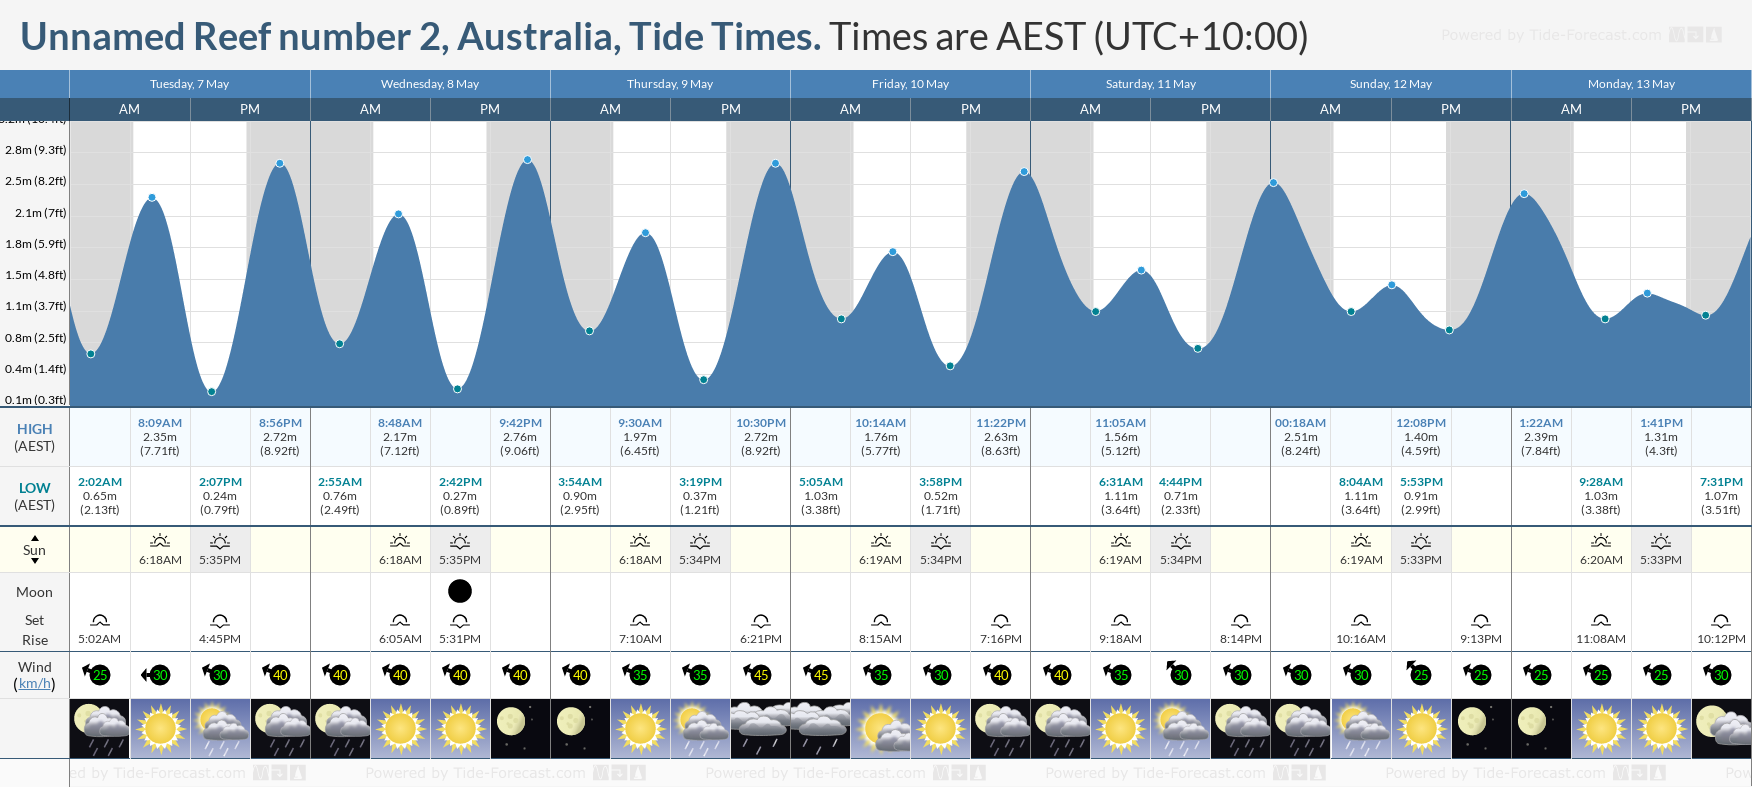 Unnamed Reef number 2, Australia Tide Chart including high and low tide tide times for the next 7 days